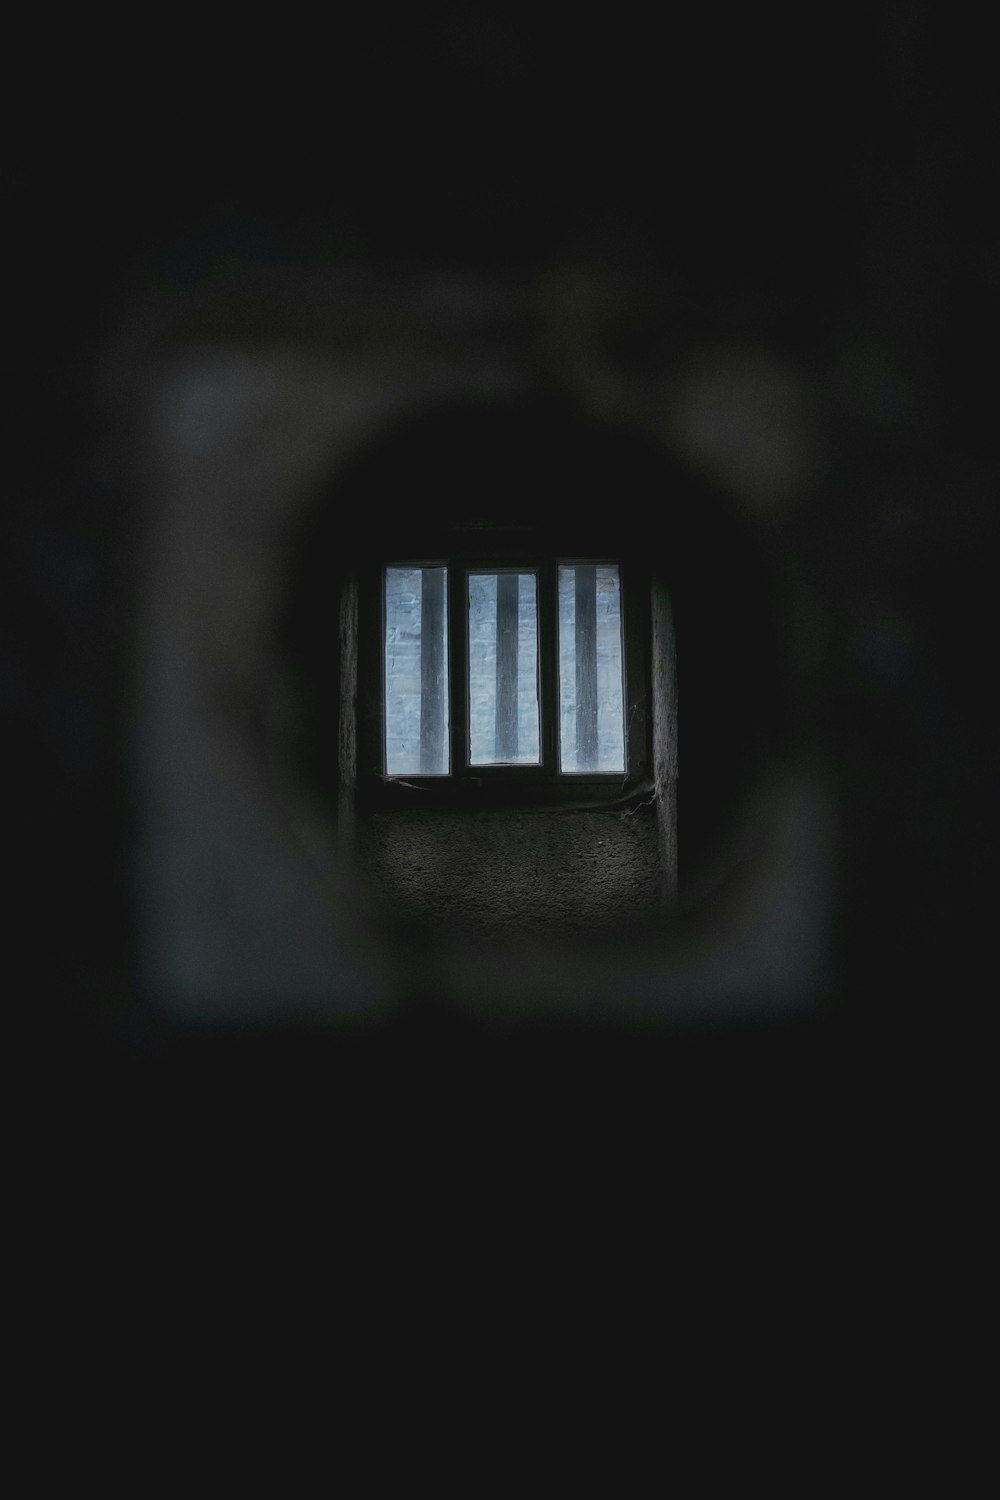 a dark tunnel with bars in it